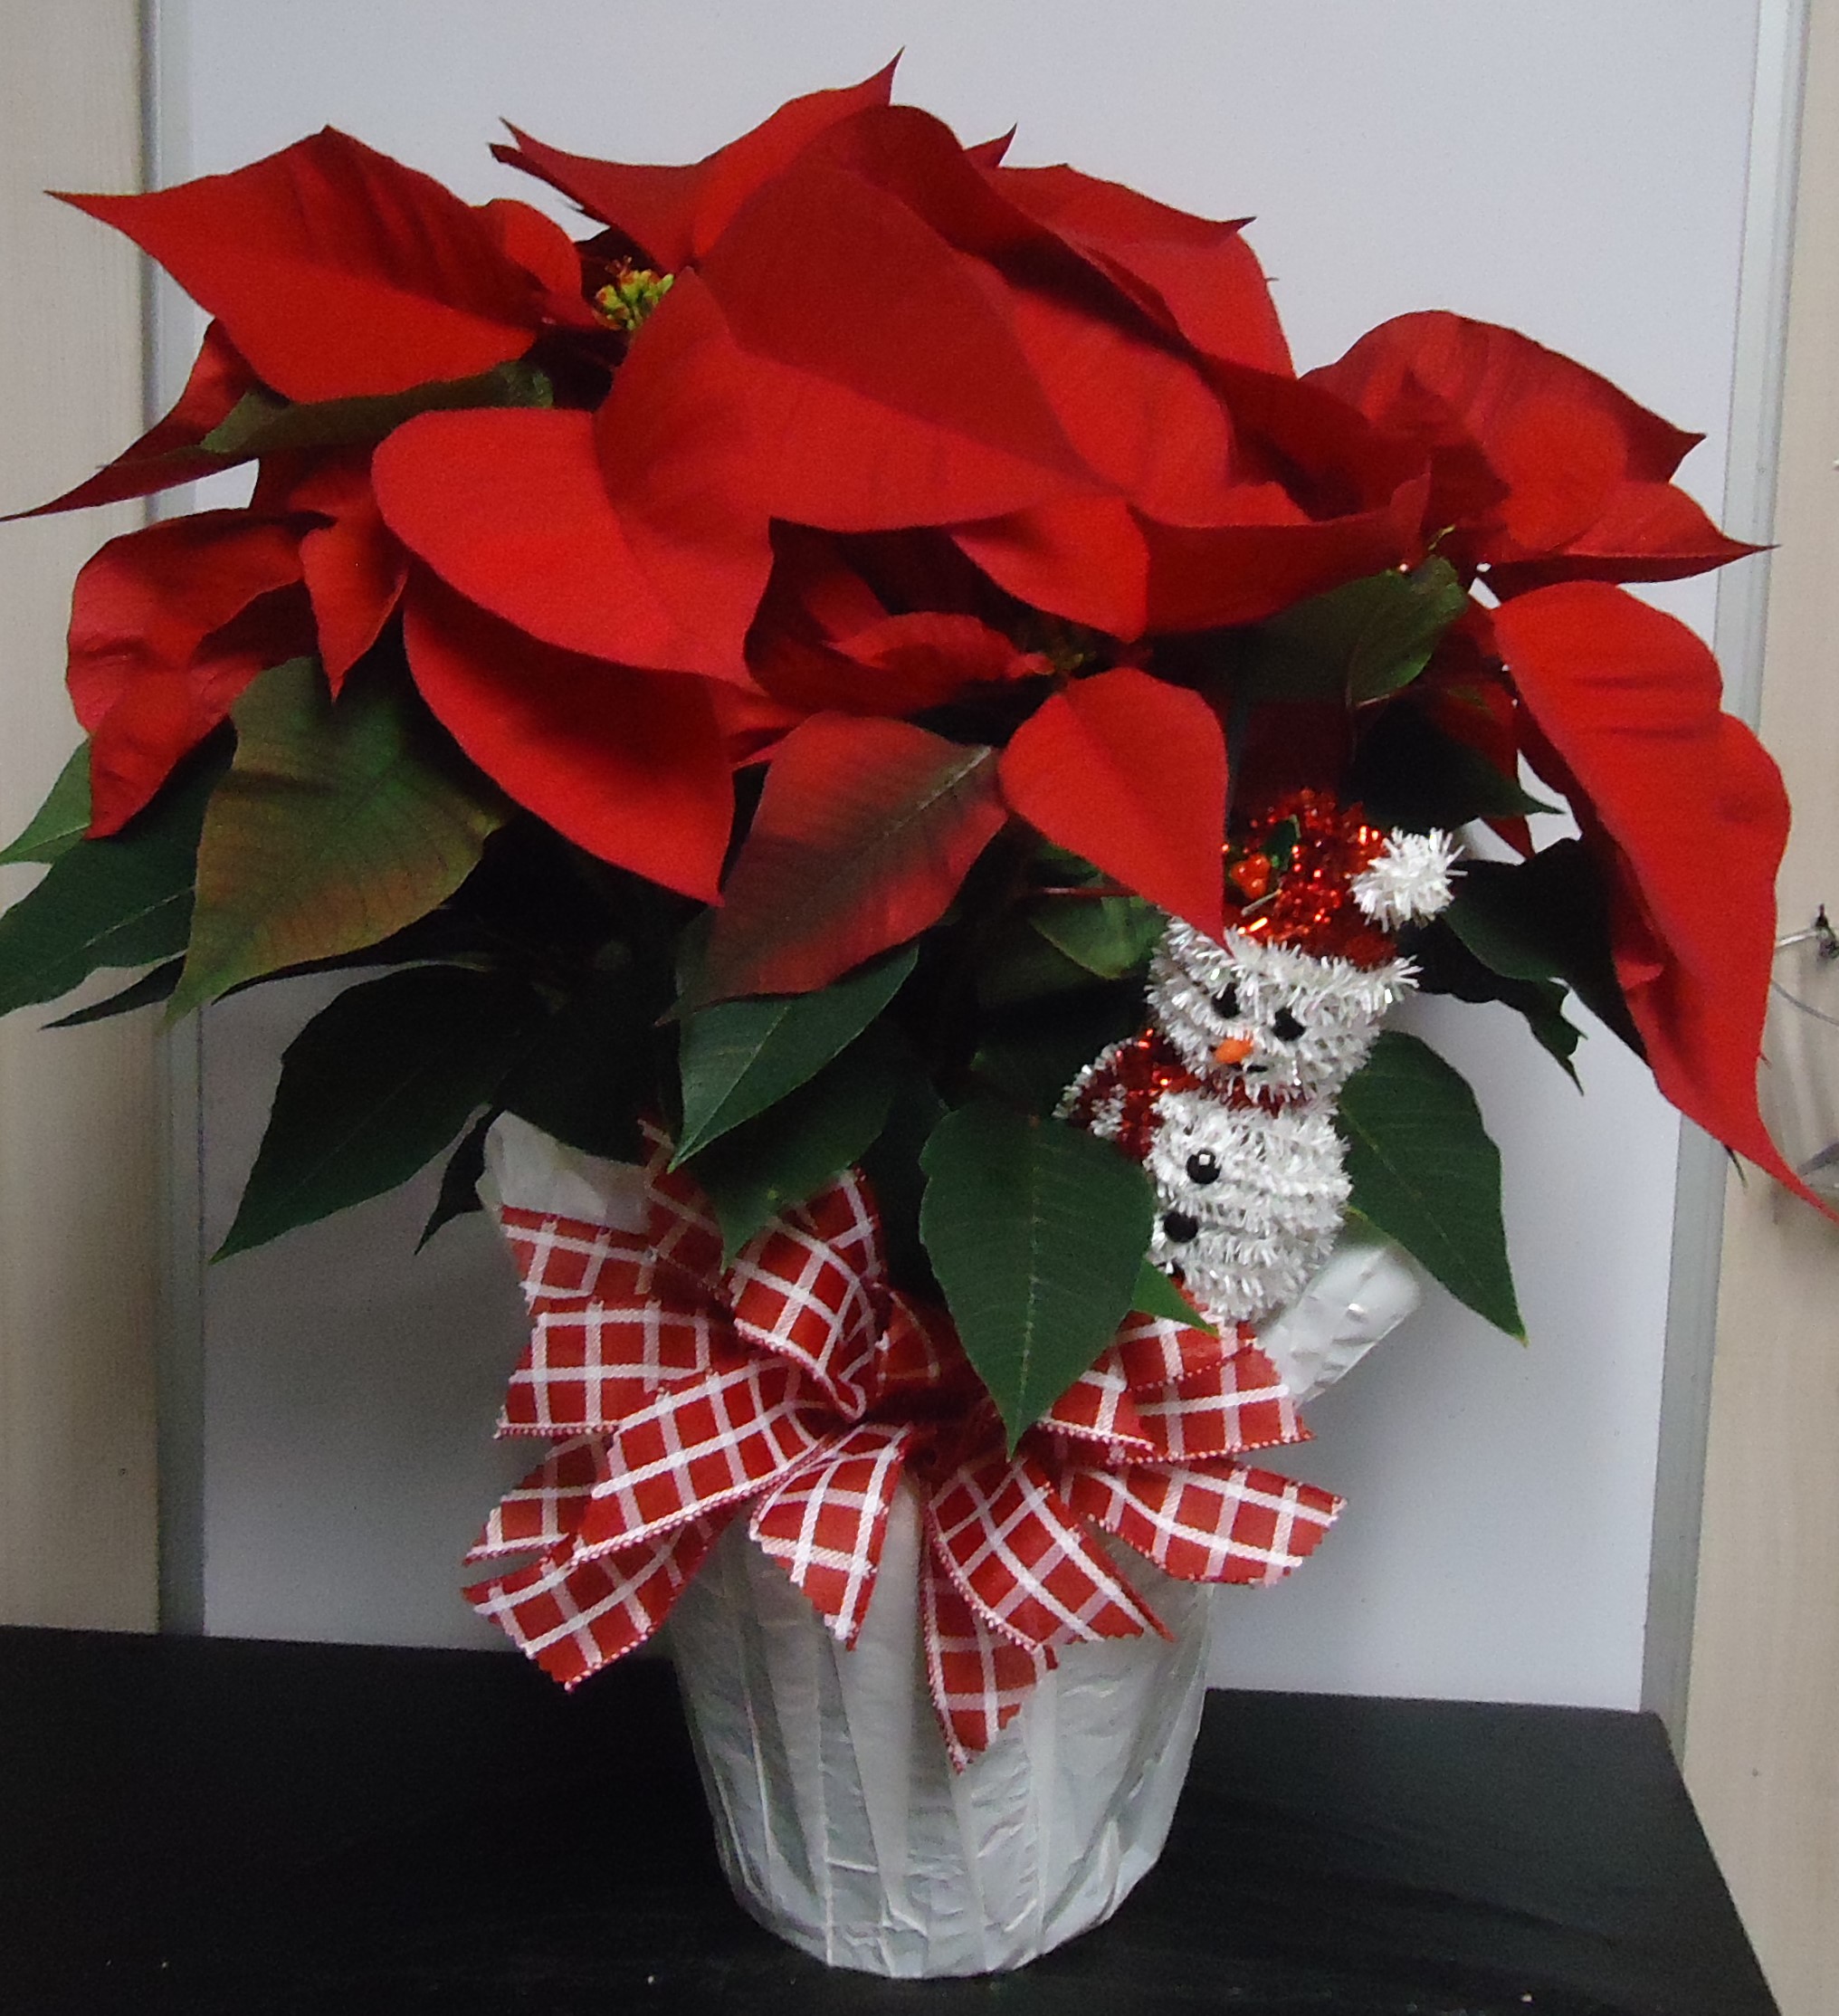 (6) "Larger" Red Poinsettia
W/ Snowman
$60.00